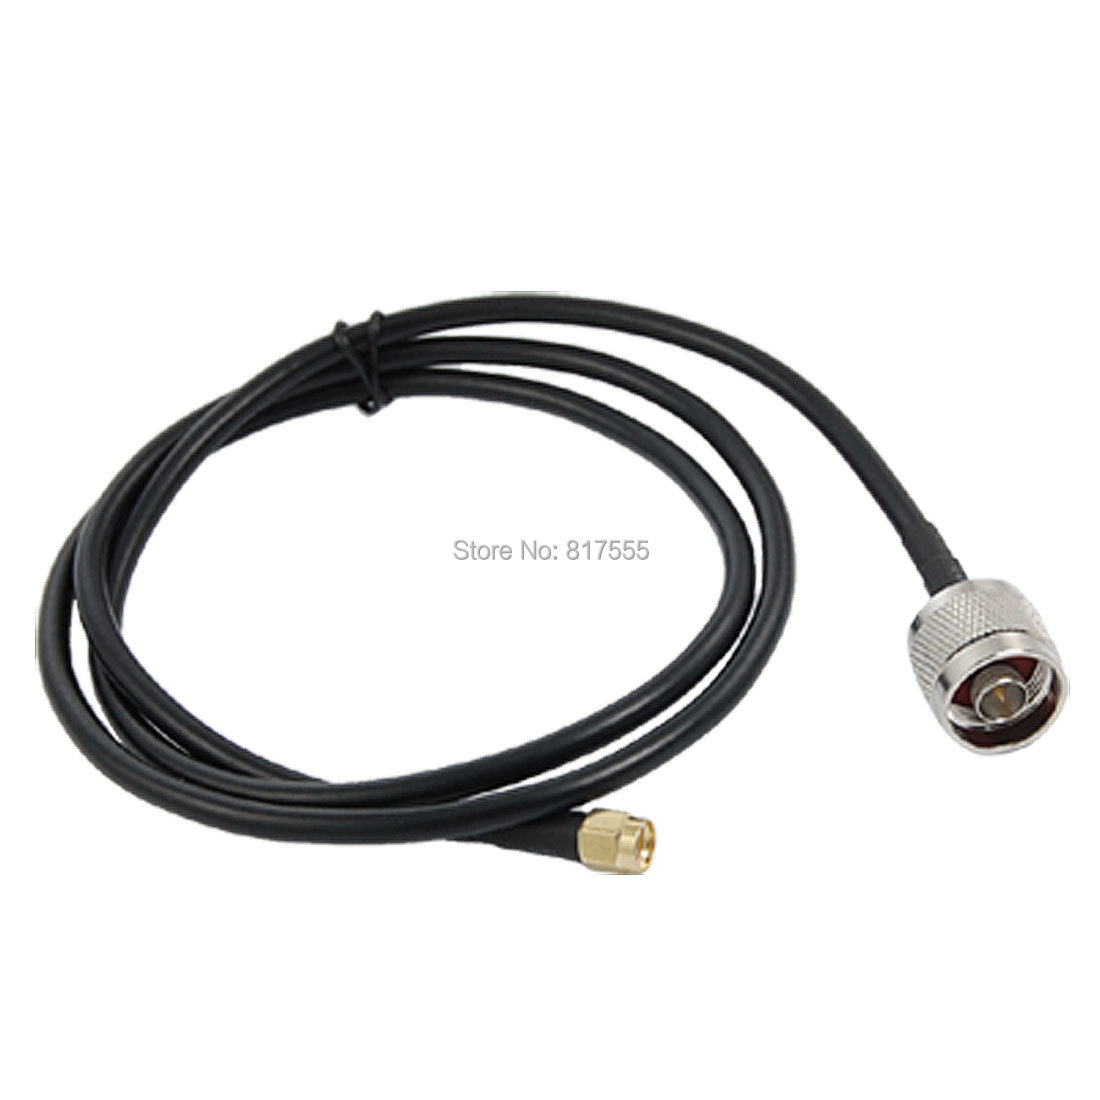 N Male Connector to RP-SMA Male Antenna Pigtail Cable 1M